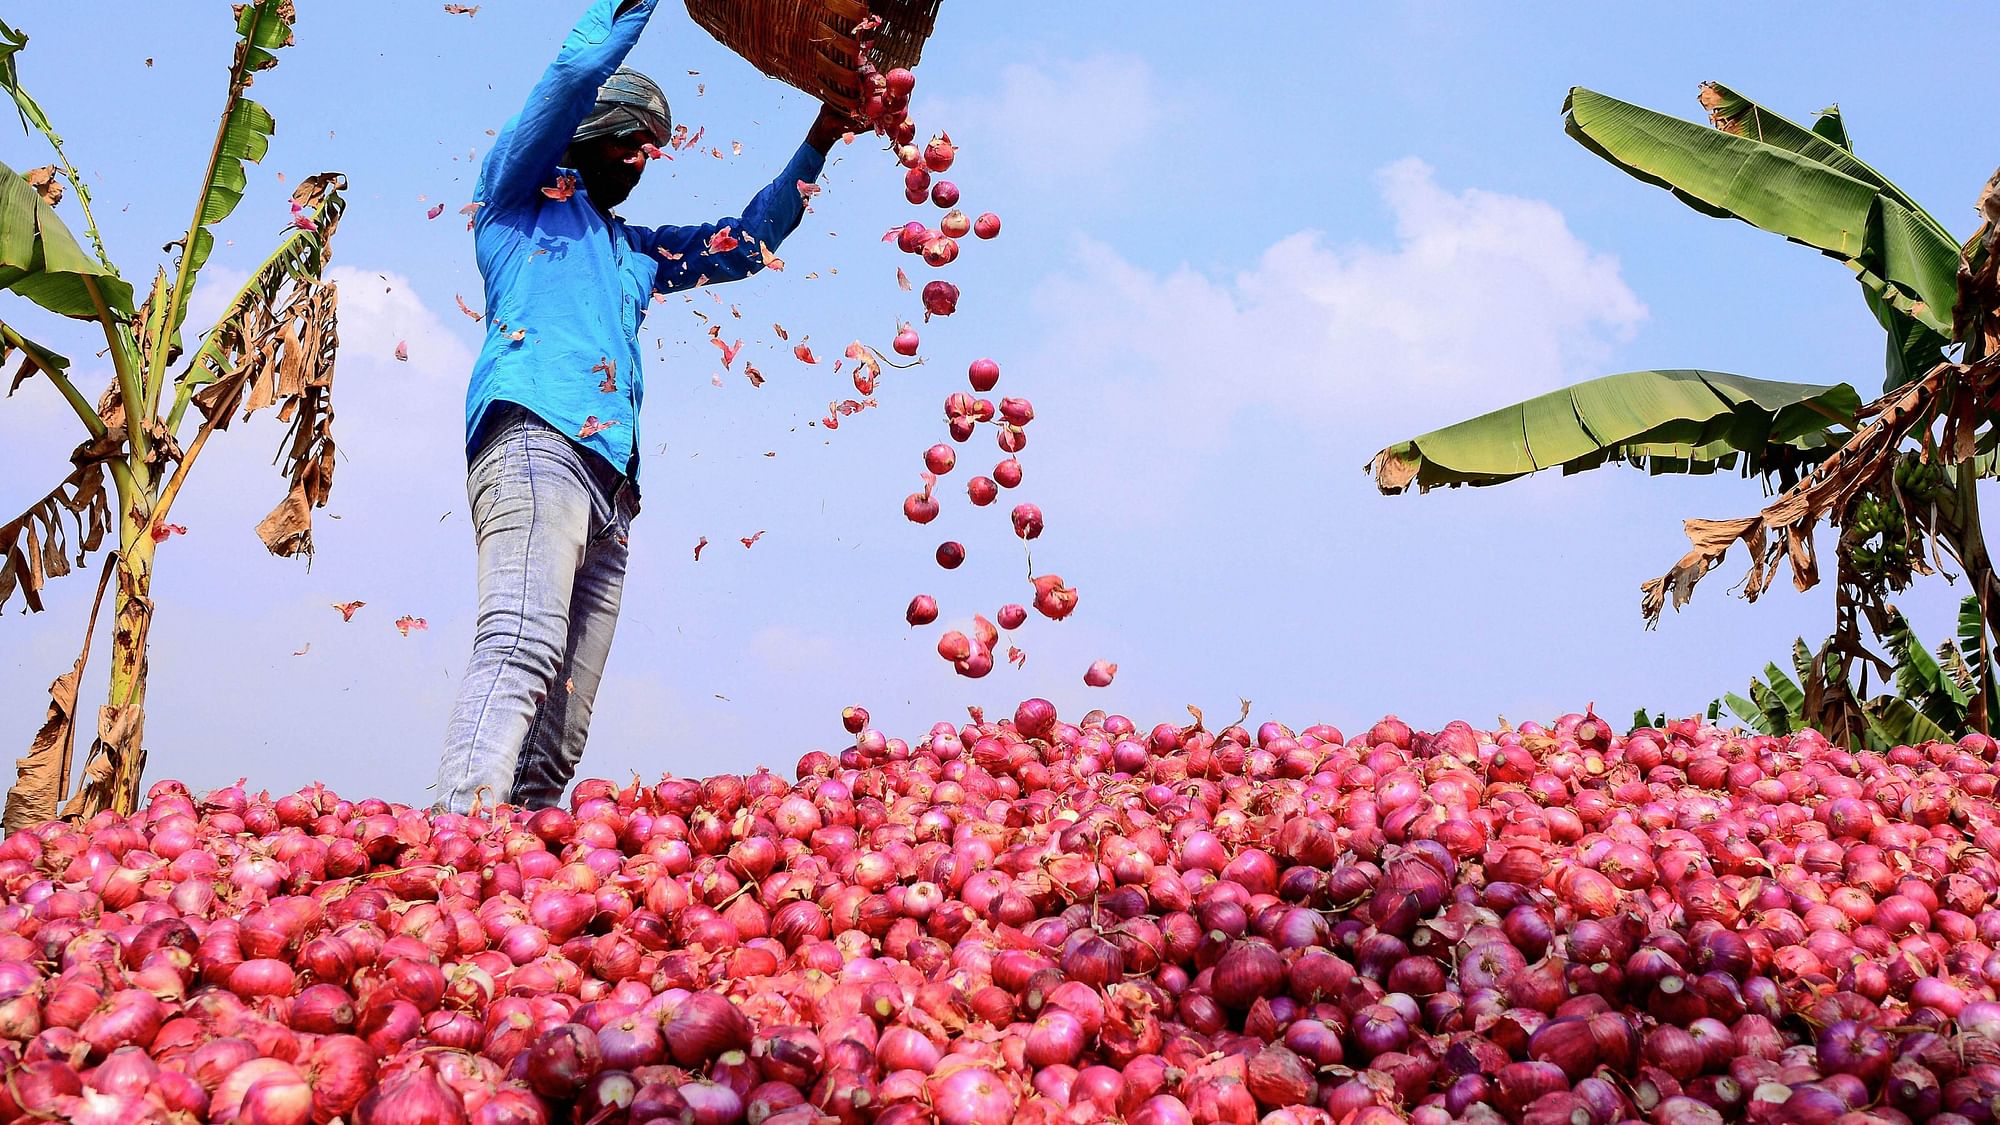 Govt will be lifting the ban on onion exports as prices are expected to drop sharply.